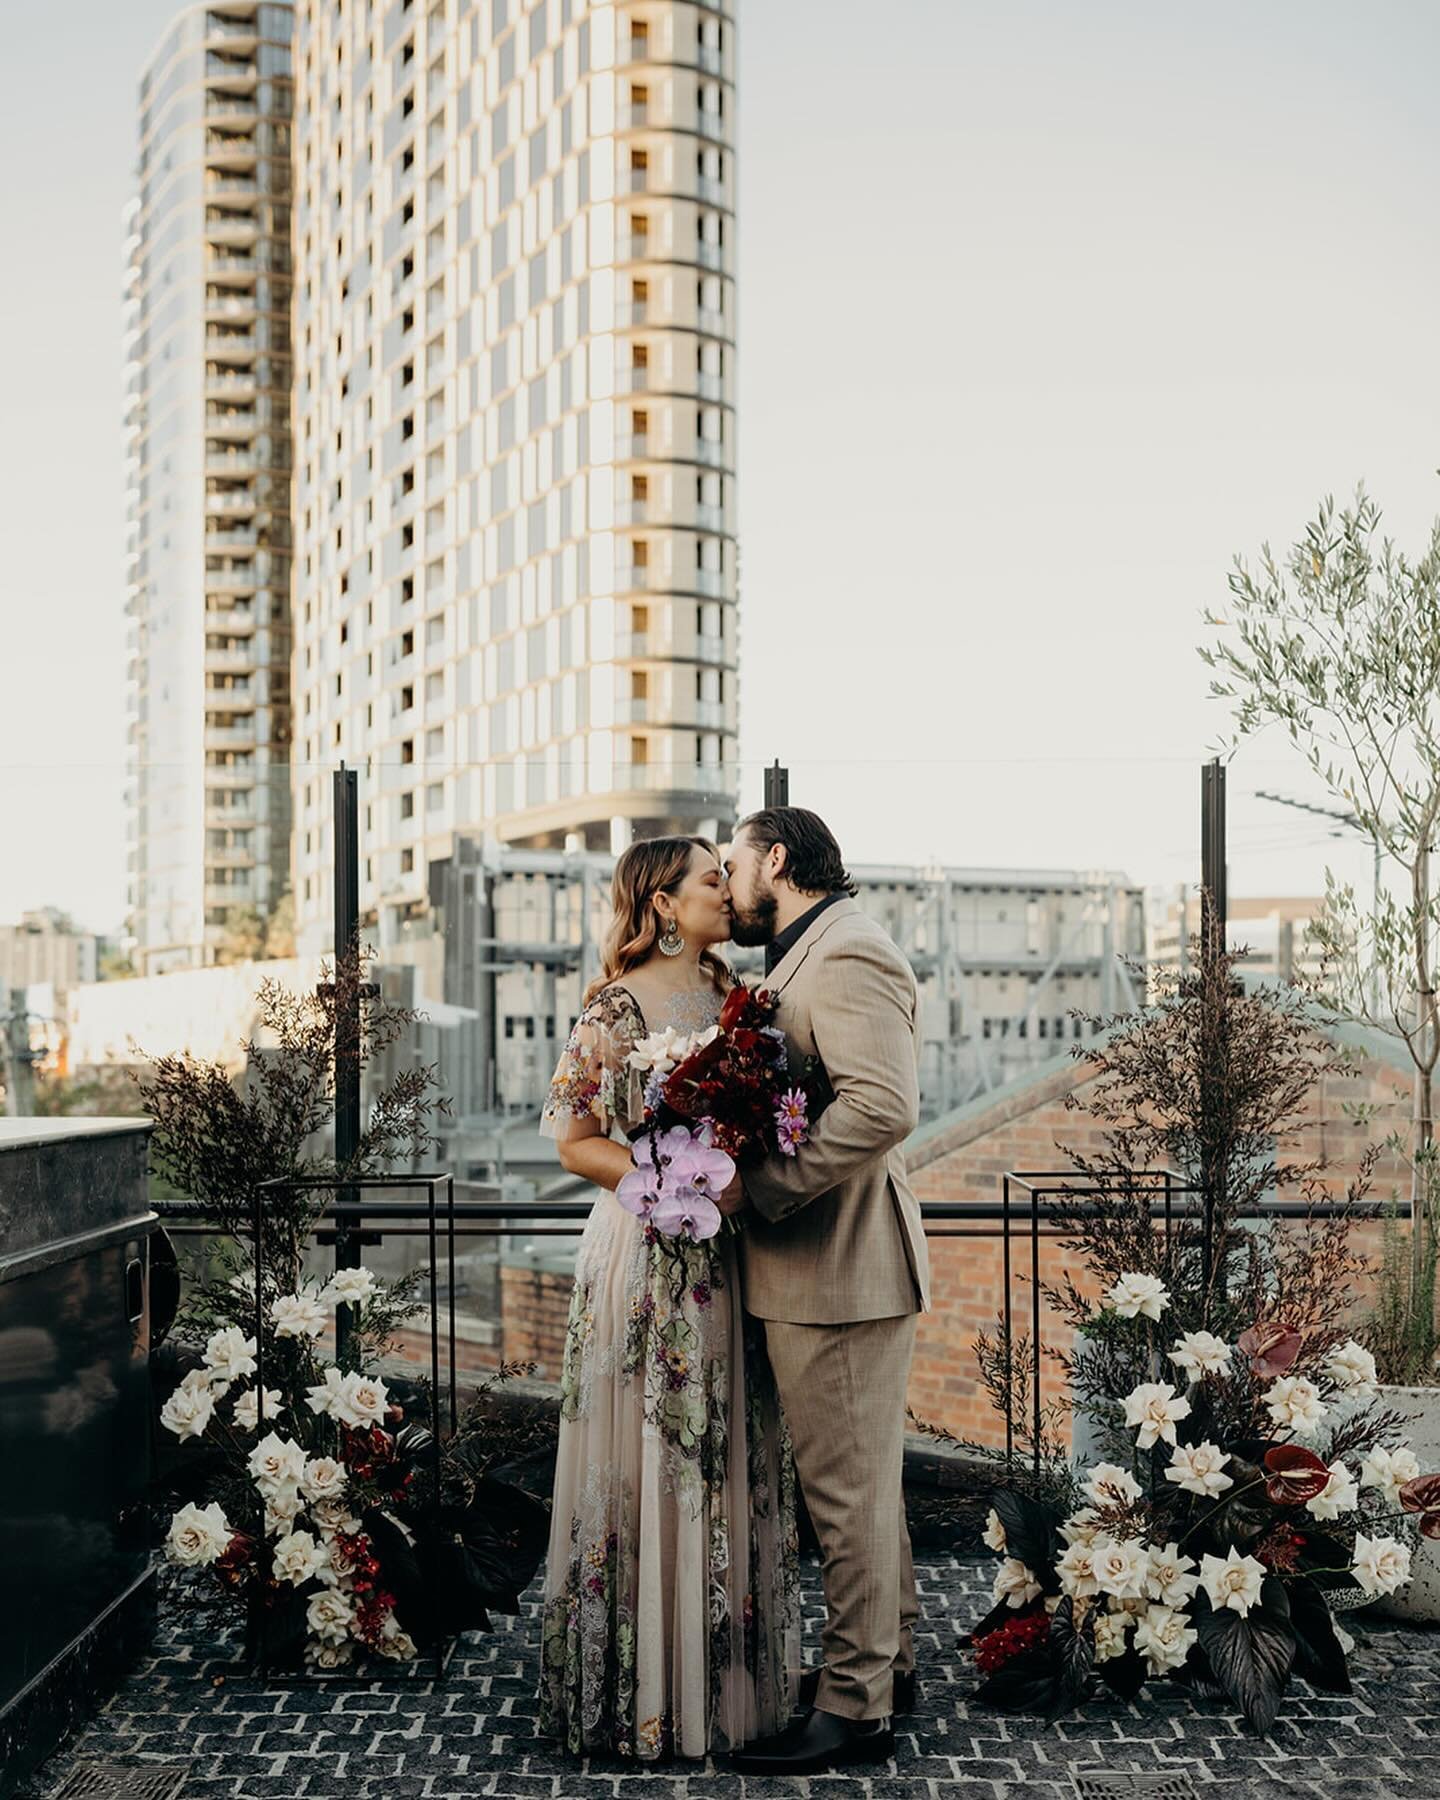 they wanted urban, fun and different.  they wanted florals + concrete + cocktails. so we gave the @mrsgibbonsflowers + @agnes.restaurant and a little @hellojoshwithers for their rooftop elopement &amp; private dining room celebration. It was just the